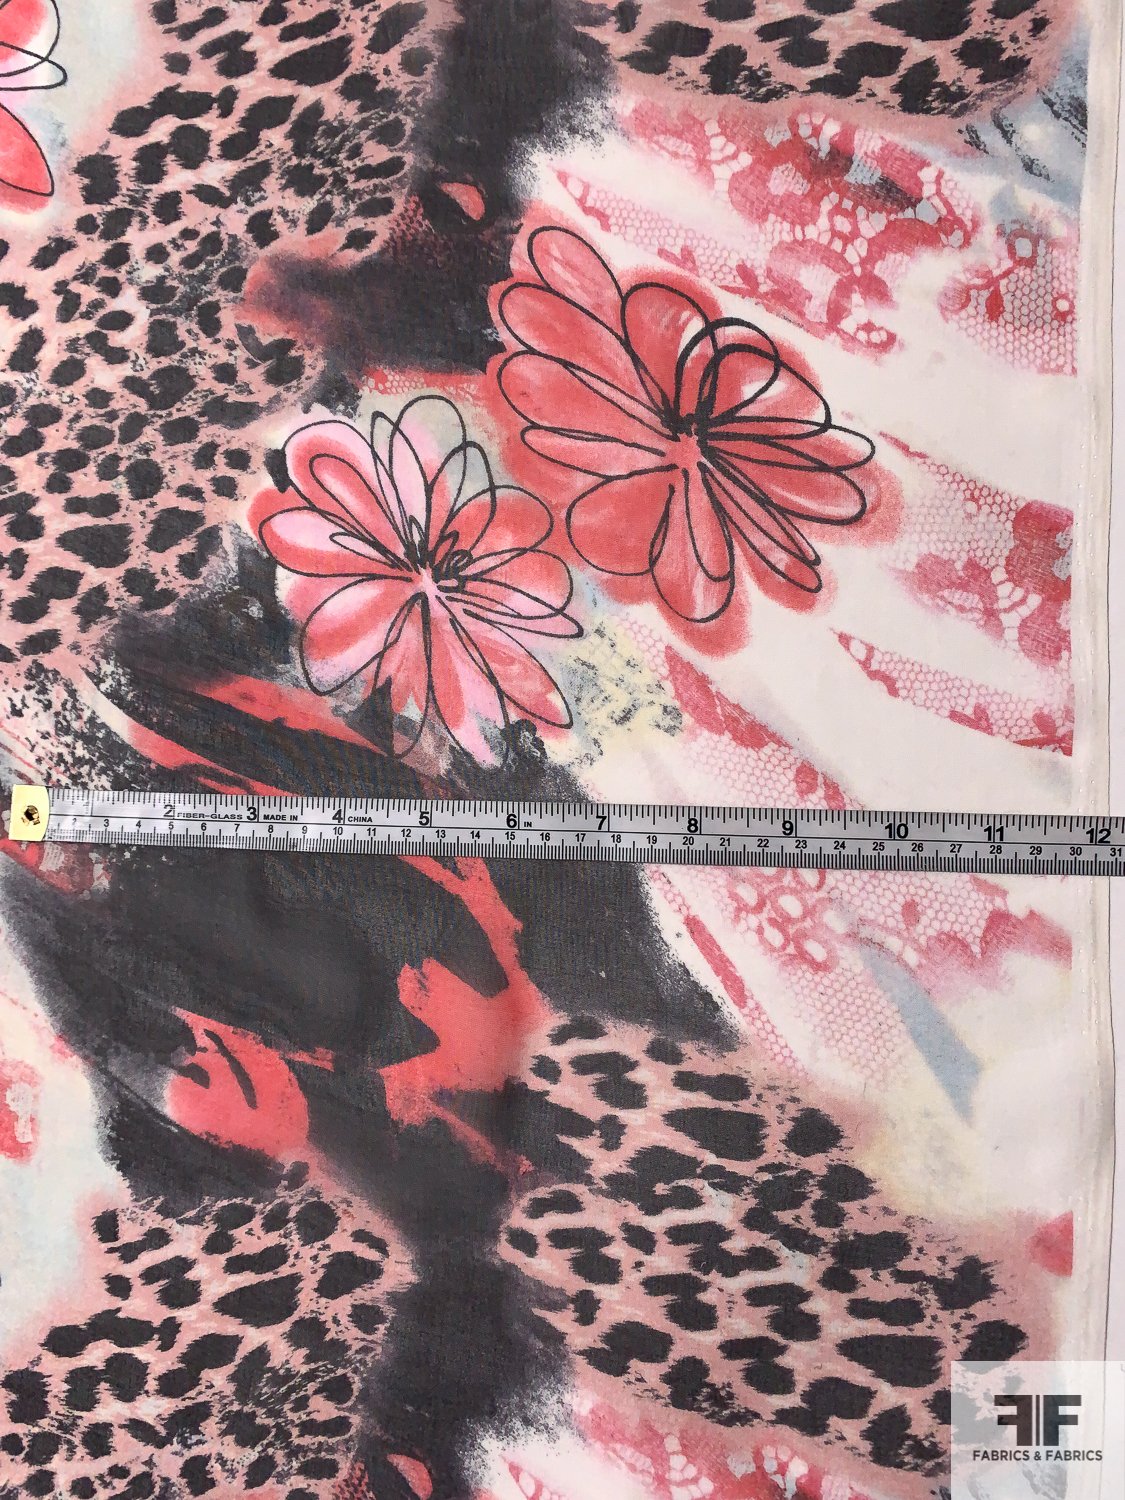 Floral Sketch and Animal Collage Printed Silk Chiffon - Coral / Black / White